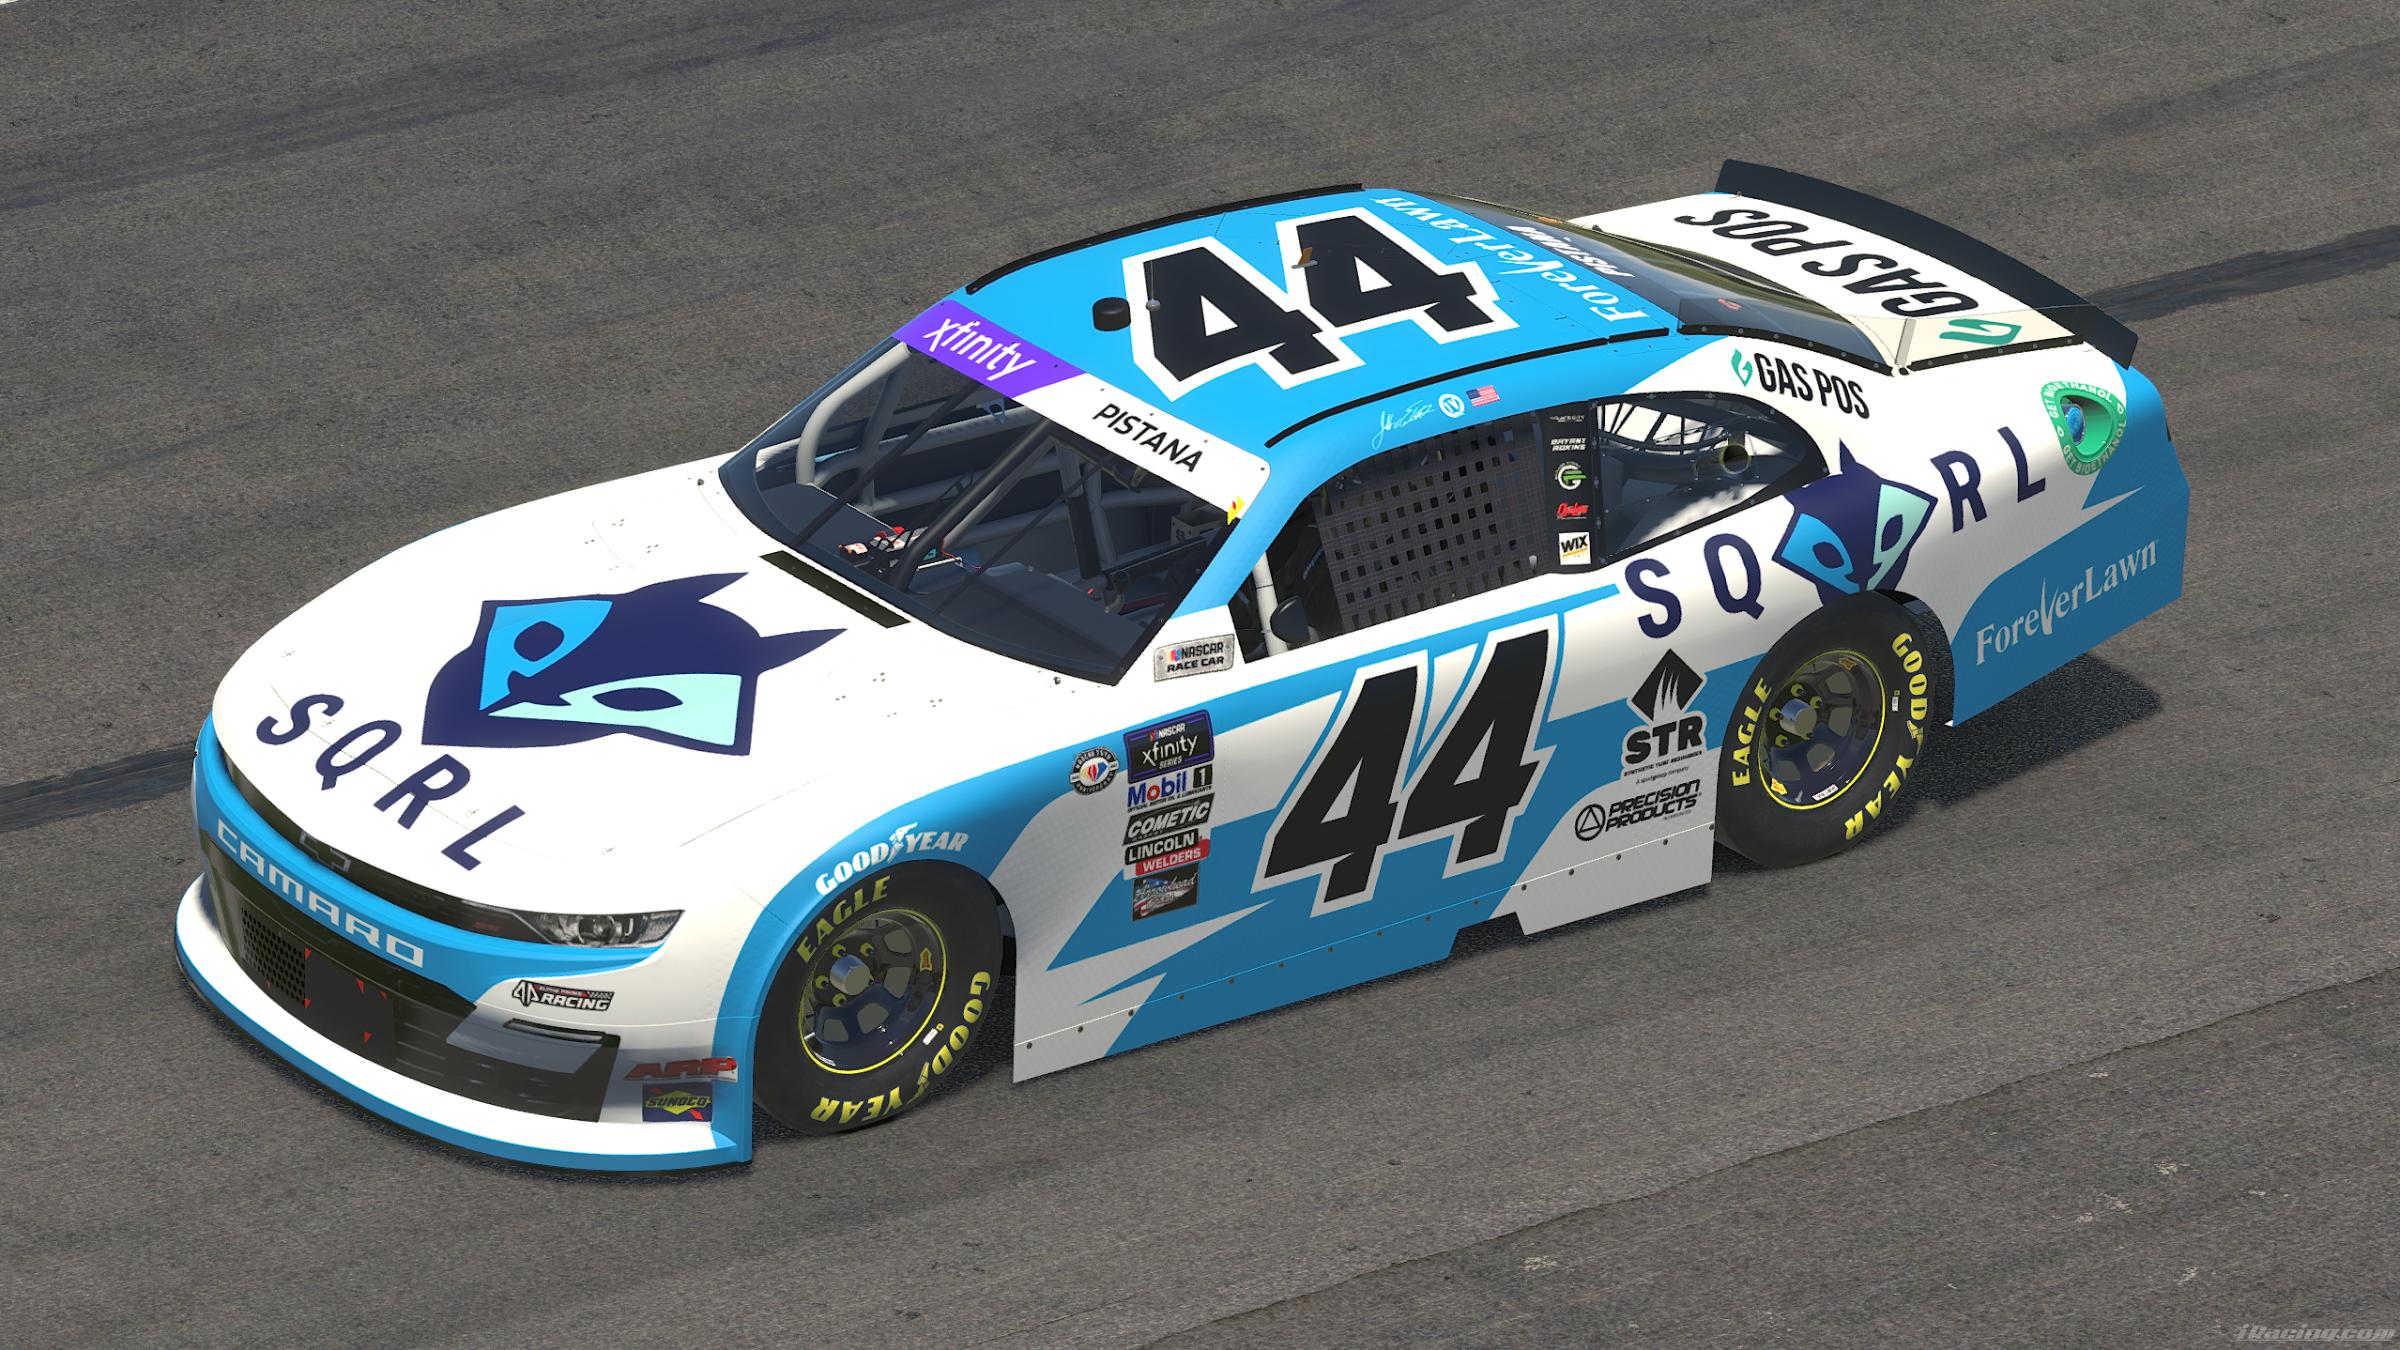 Preview of 2023 Jeffrey Earnhardt #44 SQRL/Gas POS by Ryan Pistana